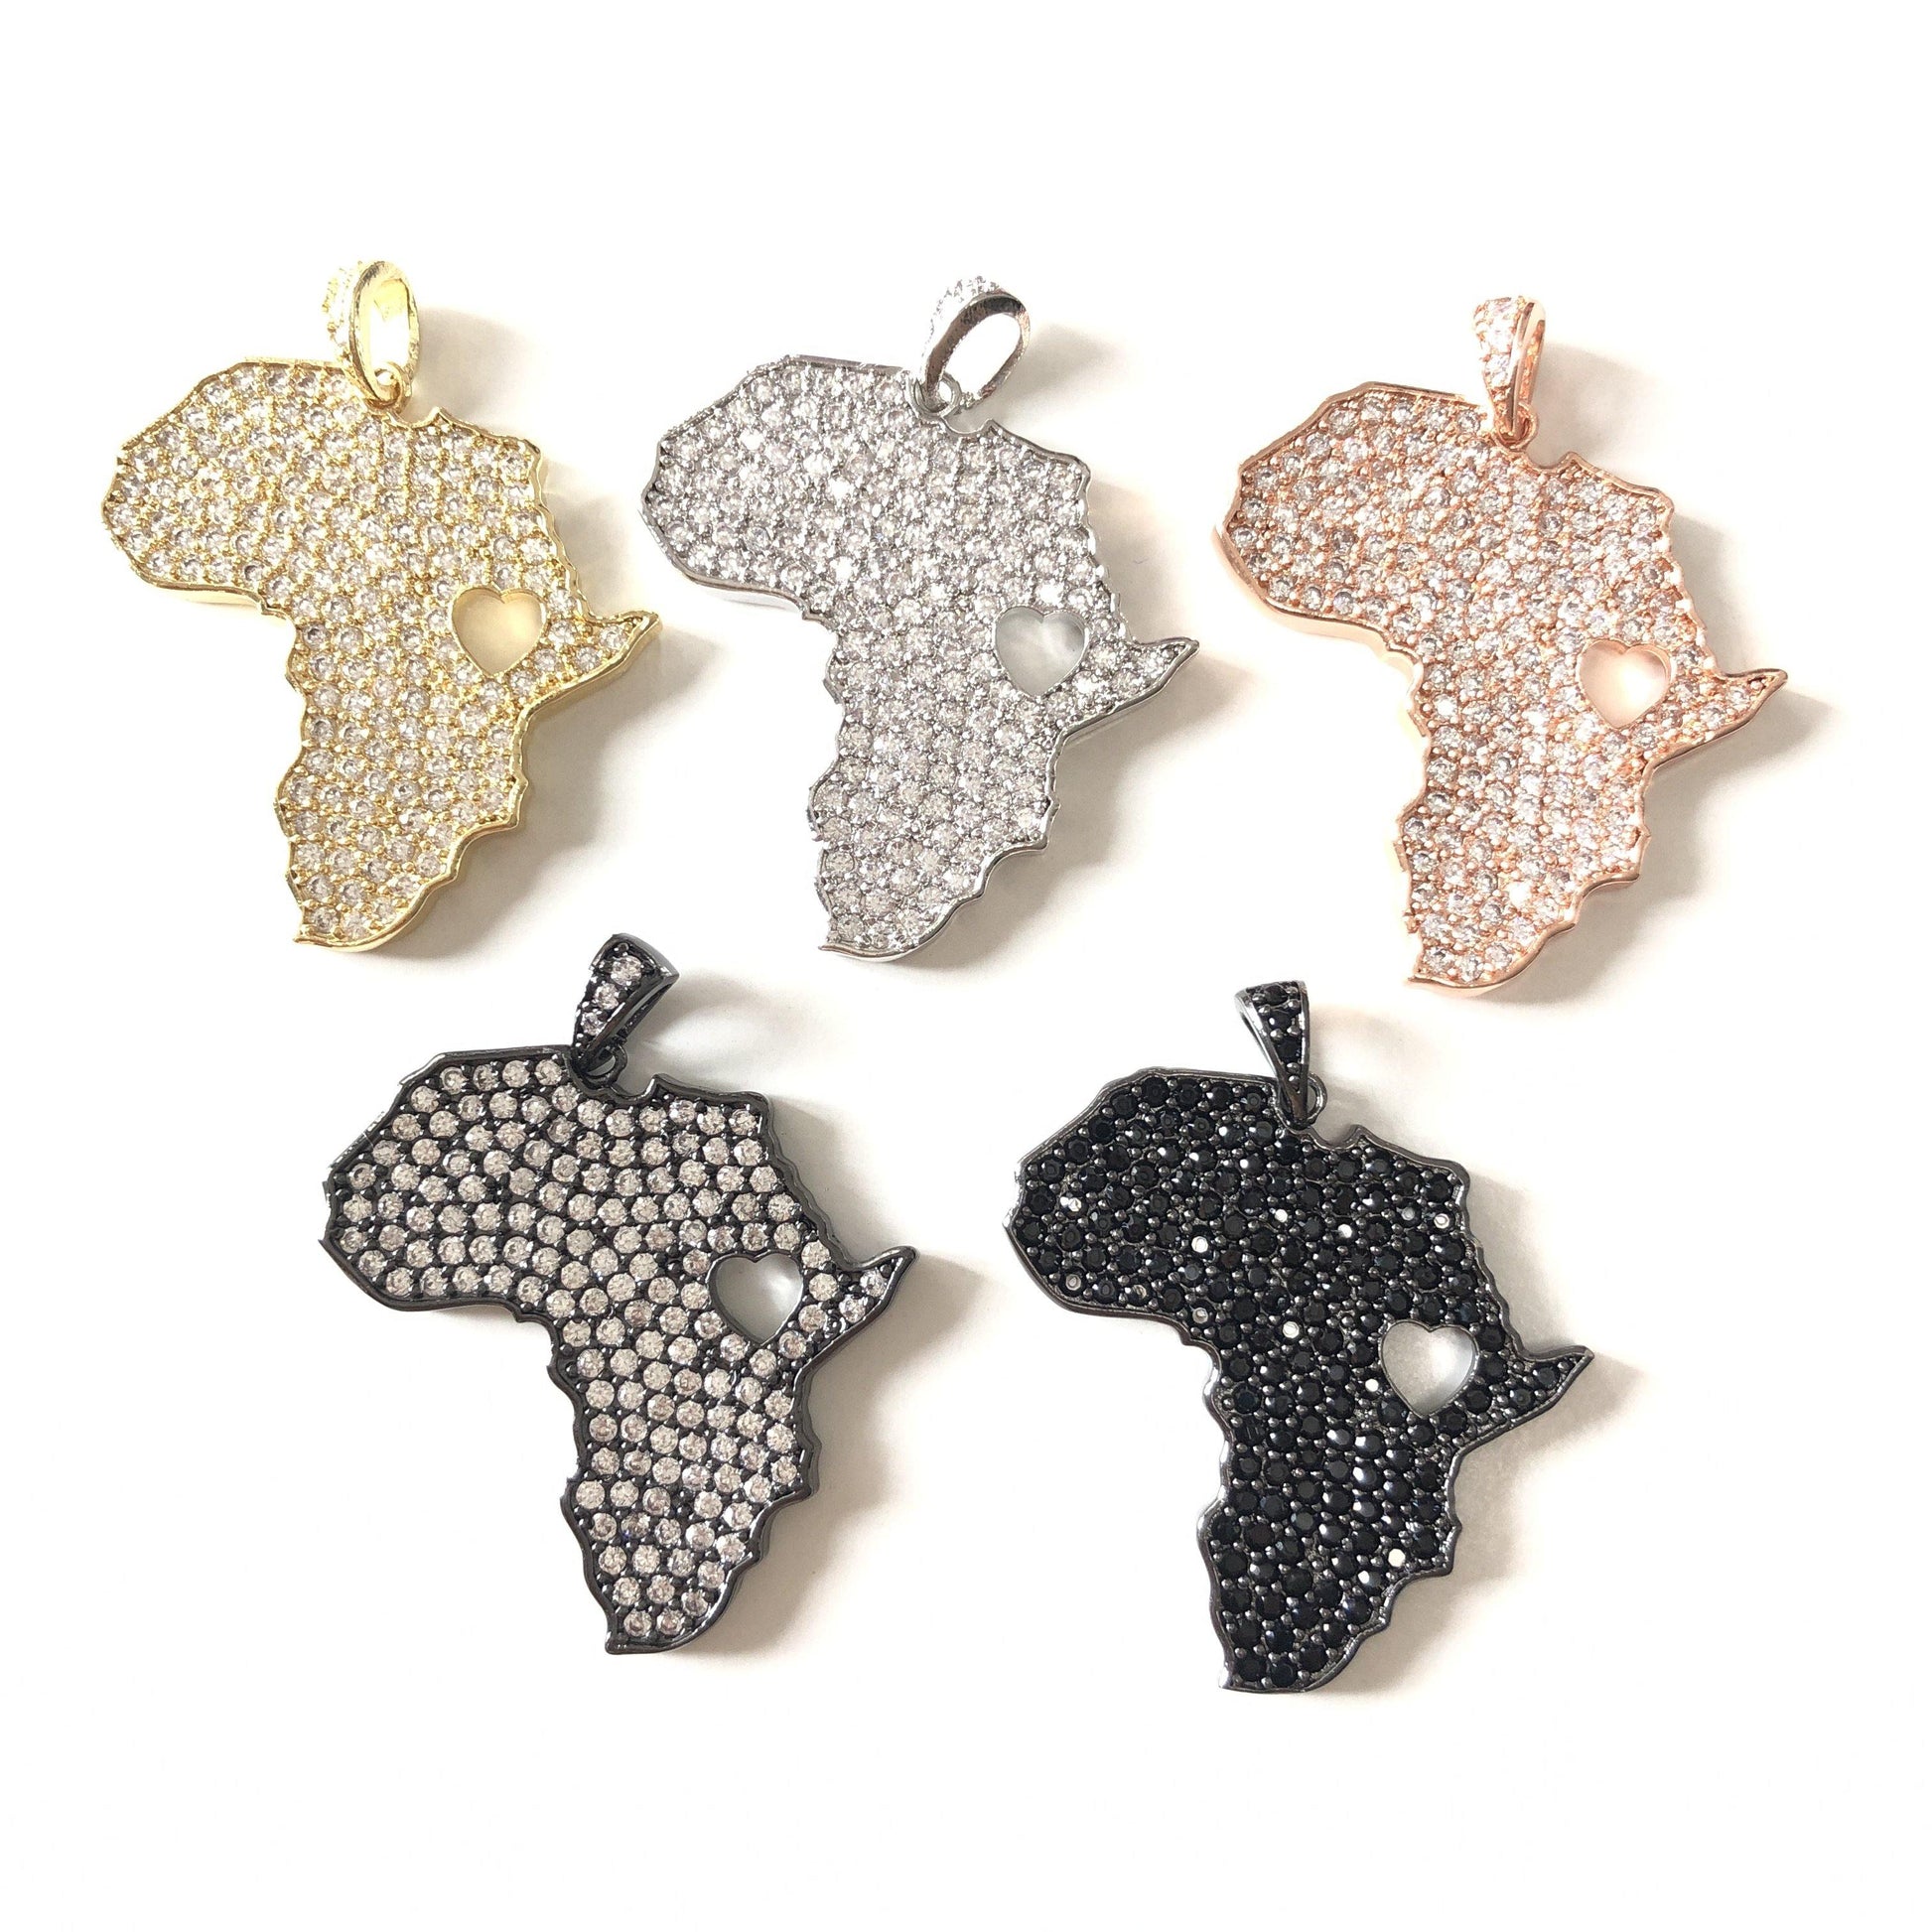 10pcs/lot 35*29mm CZ Paved Love Africa Charms Black History Month Juneteenth Awareness CZ Paved Charms Juneteenth & Black History Month Awareness Maps Charms Beads Beyond